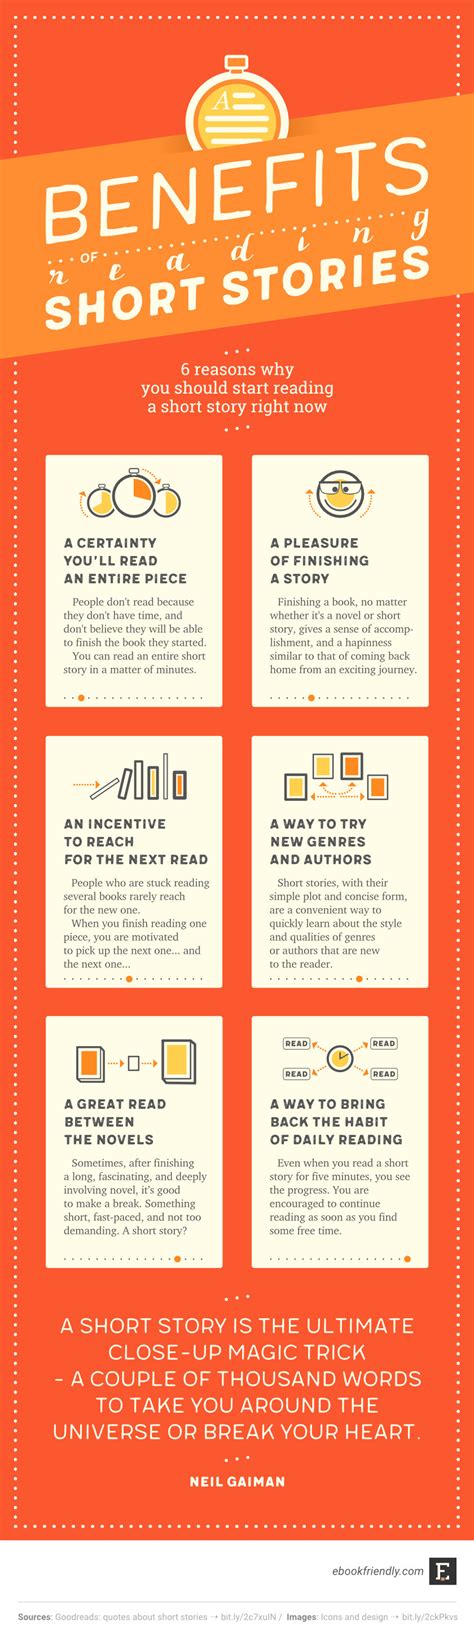 It is far easier to read one story every day since short stories can be read in a single setting, they are ideal for book clubs and learning circles. Benefits of reading short stories (infographic)